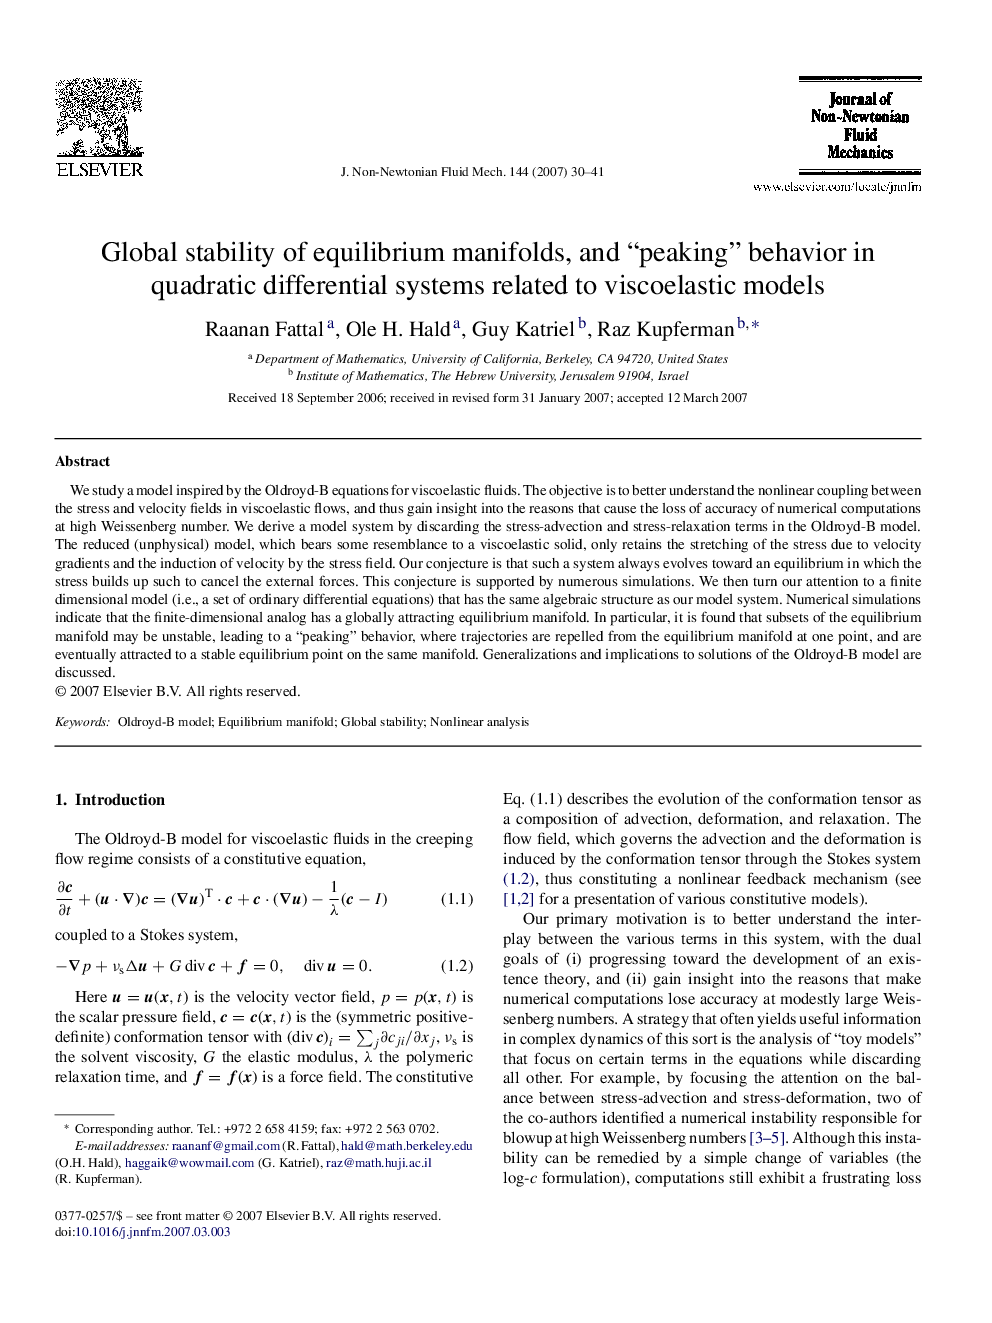 Global stability of equilibrium manifolds, and “peaking” behavior in quadratic differential systems related to viscoelastic models